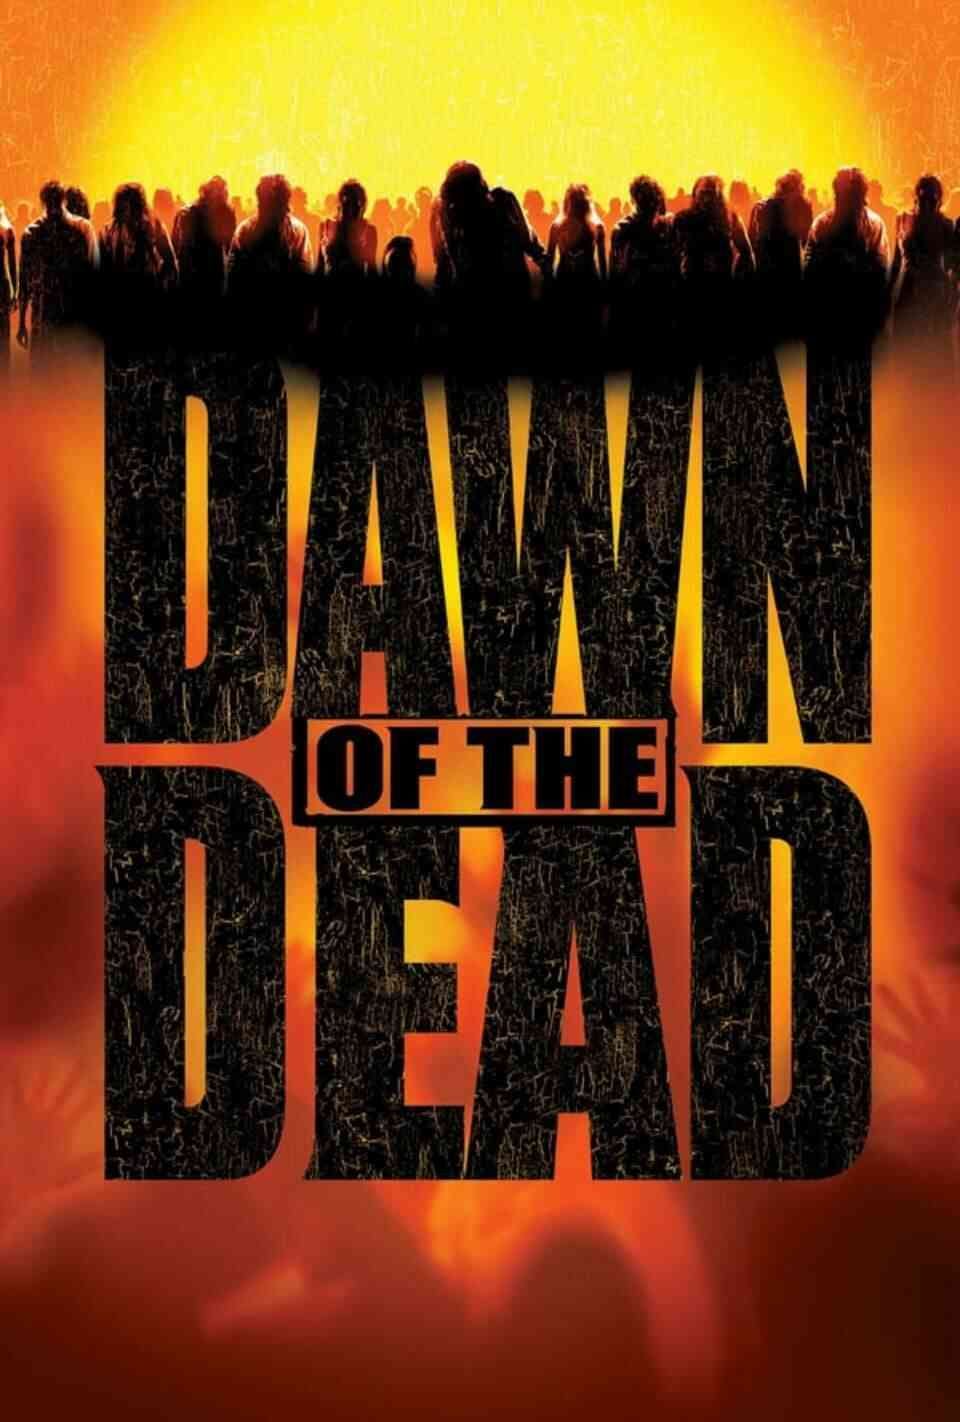 Read Dawn of the Dead screenplay (poster)